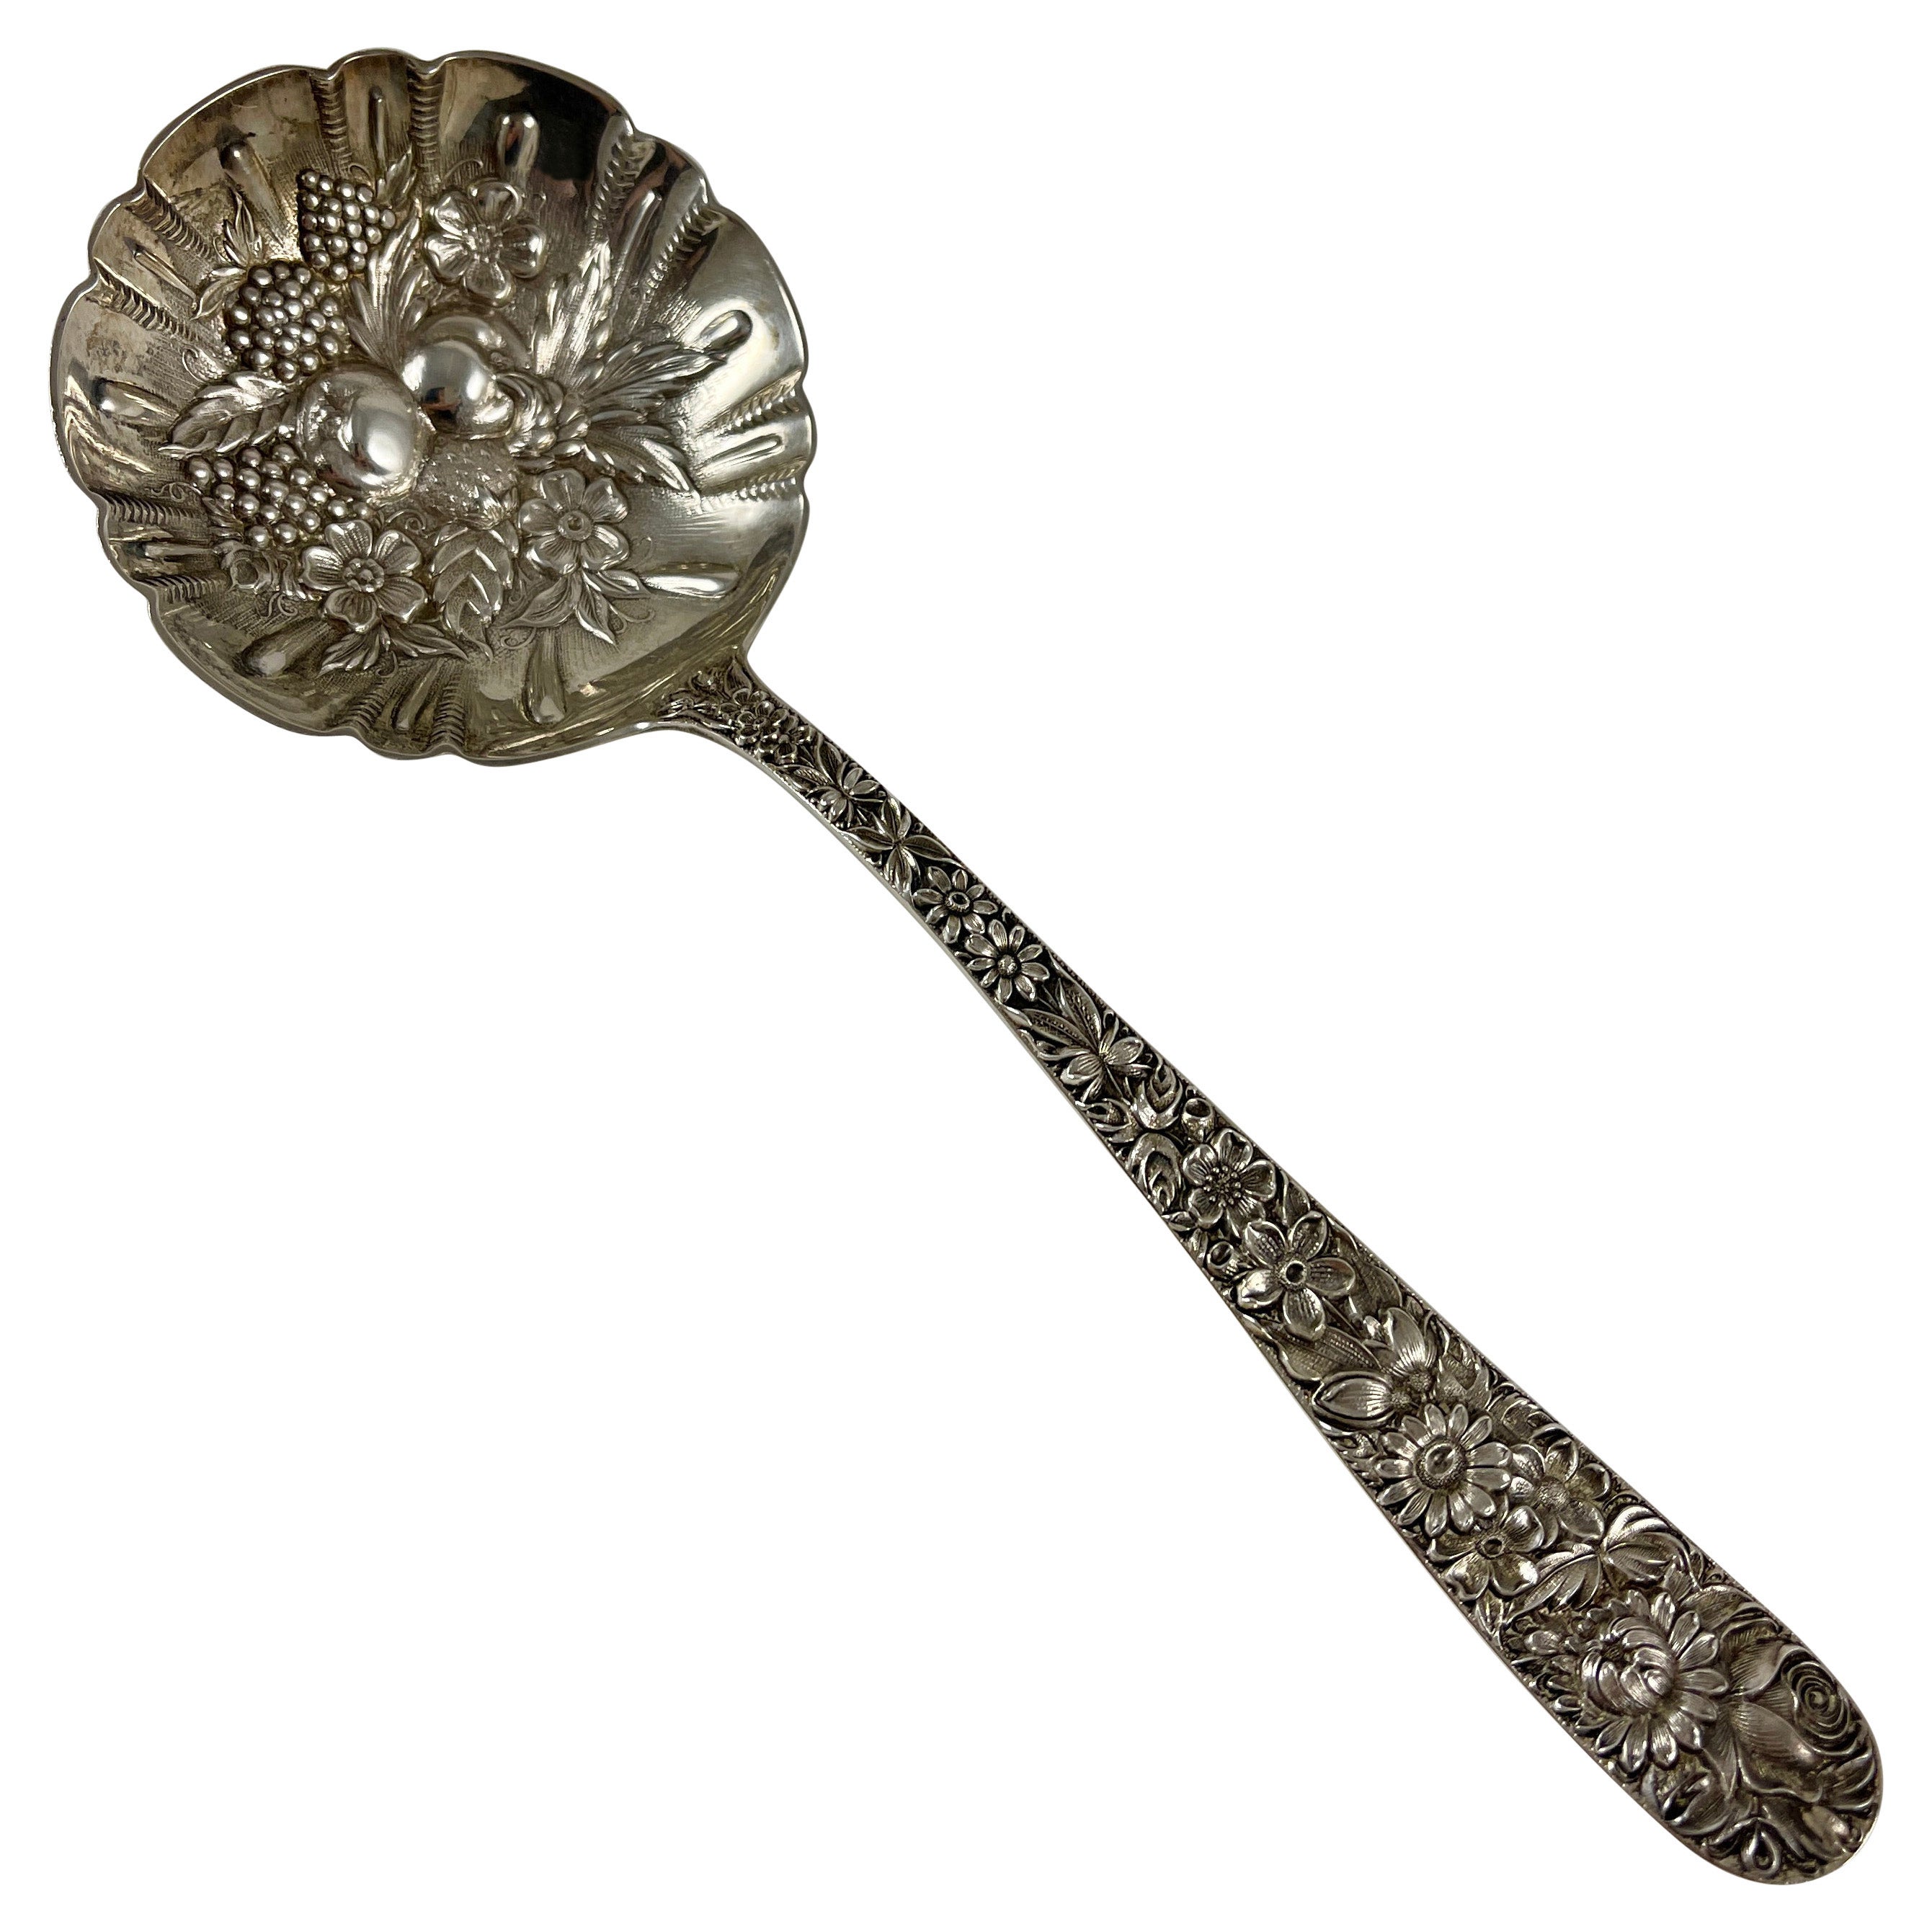 Details about   VINTAGE S KIRK & SON REPOUSSE STERLING SILVER 5 7/8" TEASPOON SOLD EACH 32g 